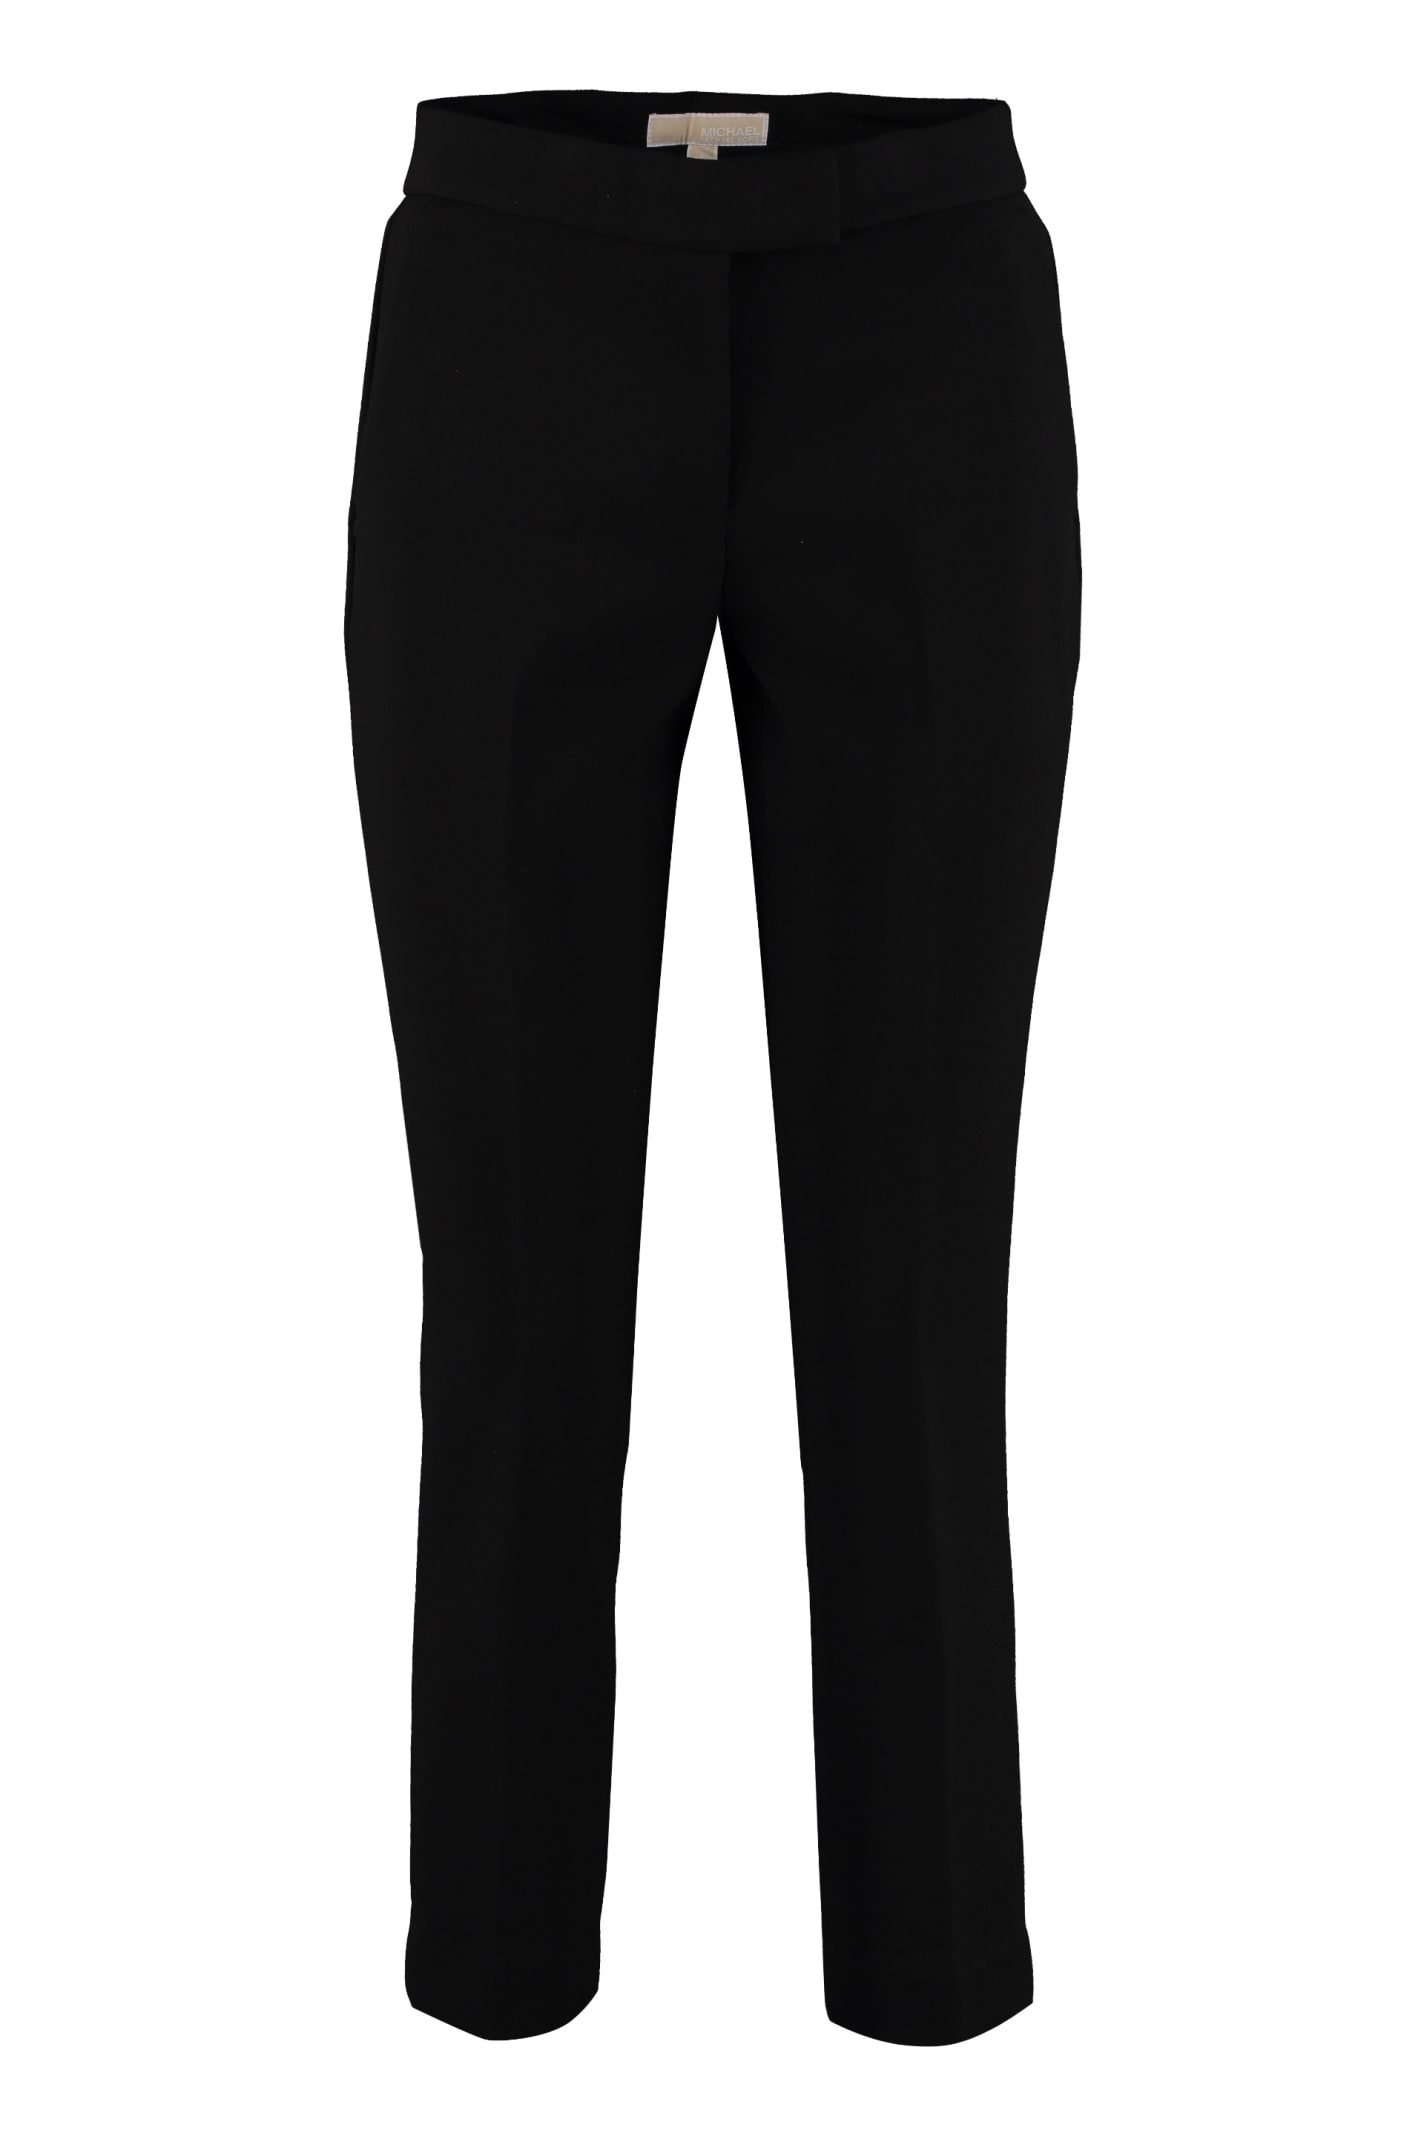 MICHAEL Michael Kors Stretch Fabric Cropped Trousers